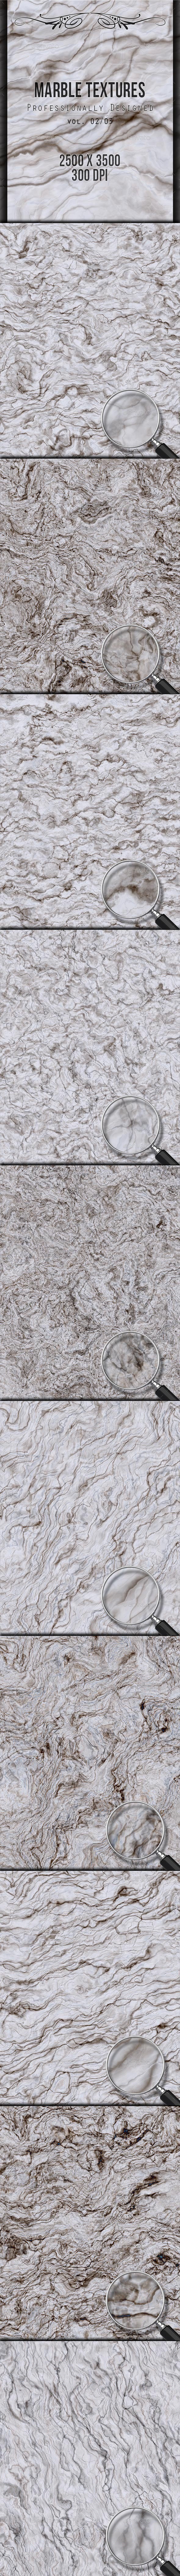 Marble textures 02 preview